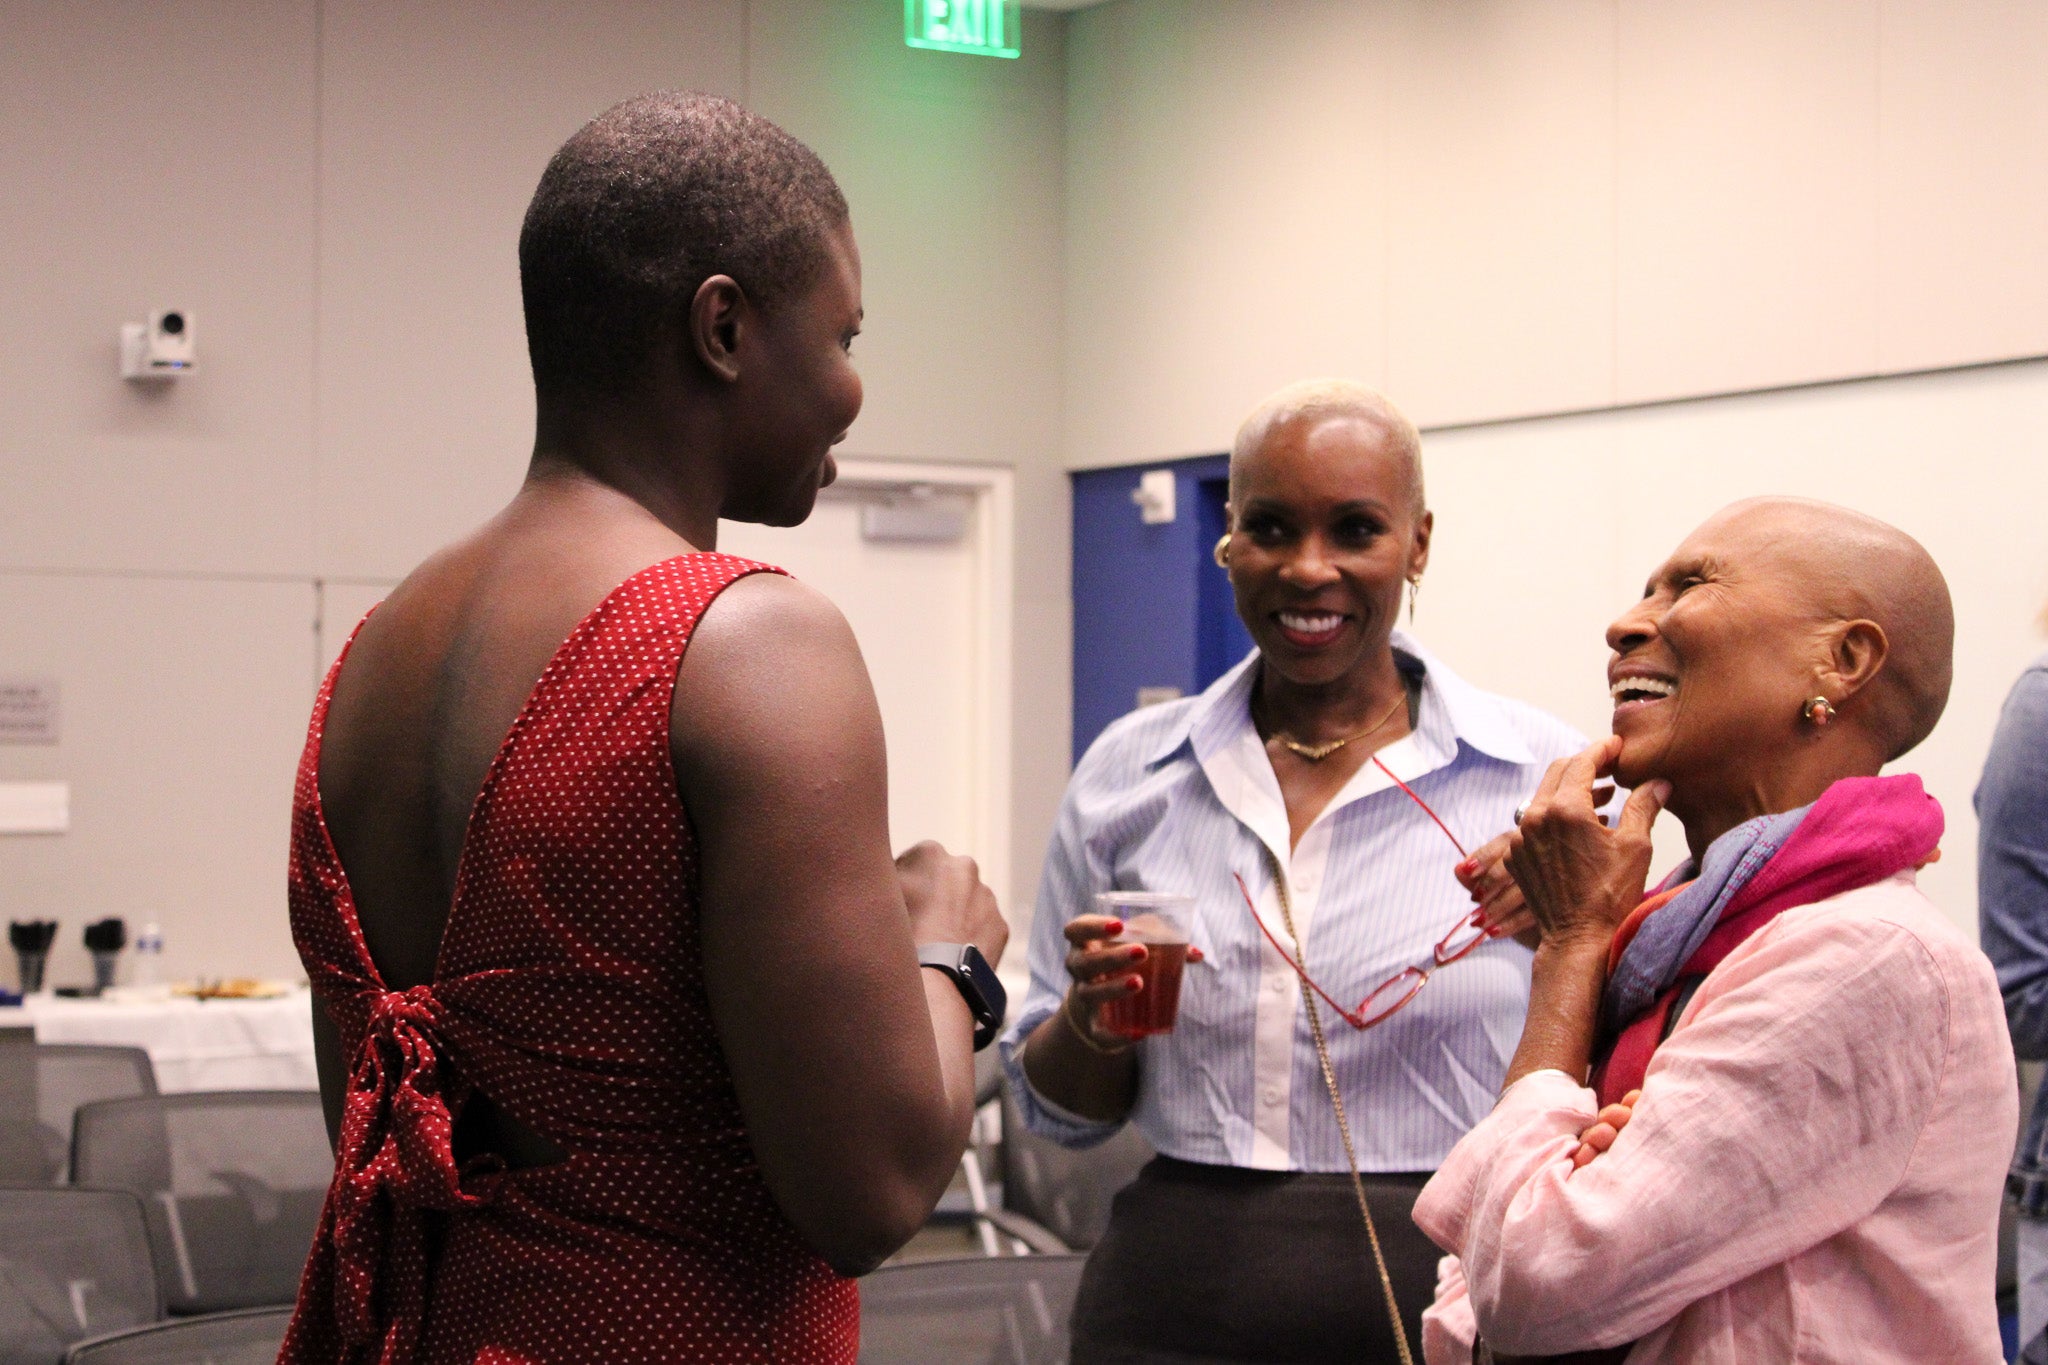 Dr. McFadden is talking with two black women after the lecture.